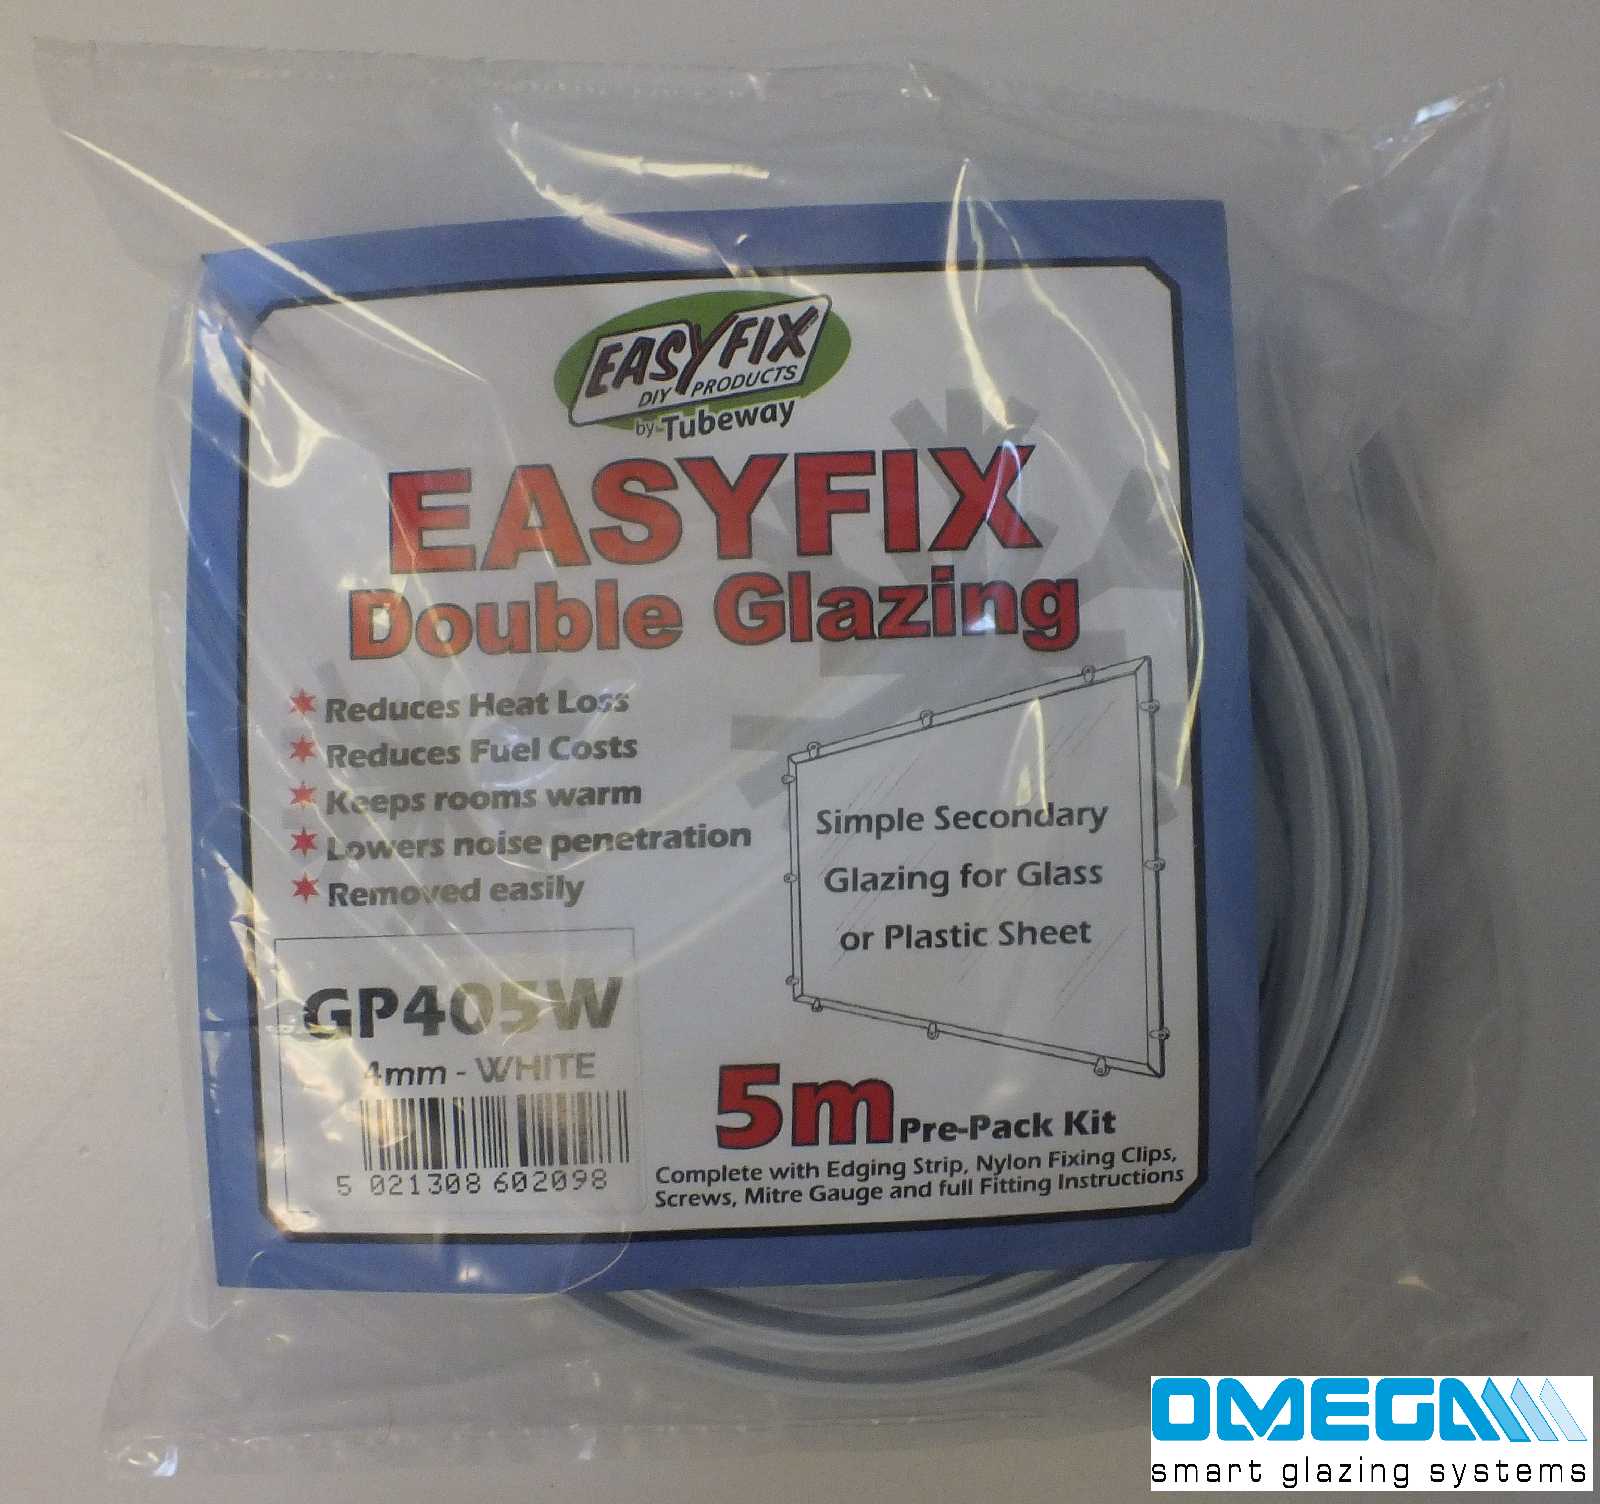 Easyfix Clipglaze Edging Kit - 5m roll of edging for 6mm Glazing Thickness, White or Clear